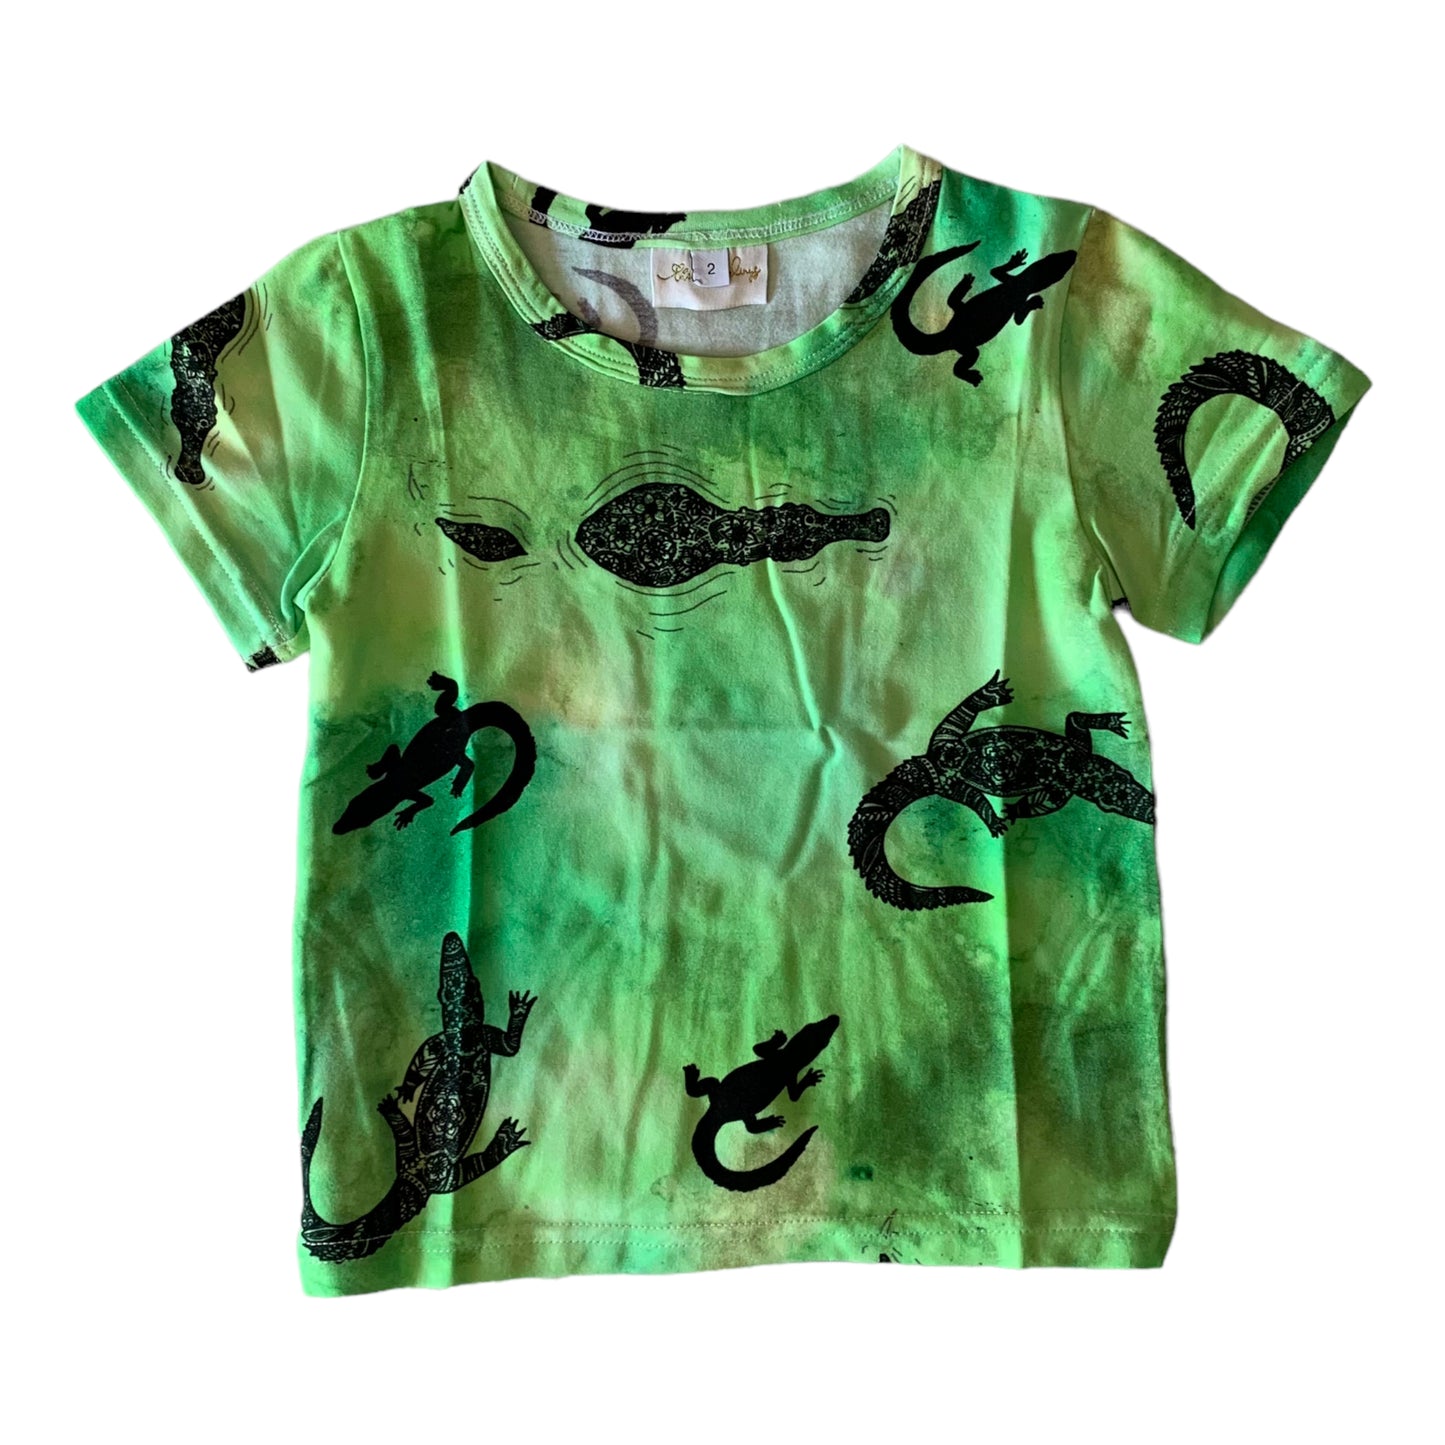 T shirt - Croc Country